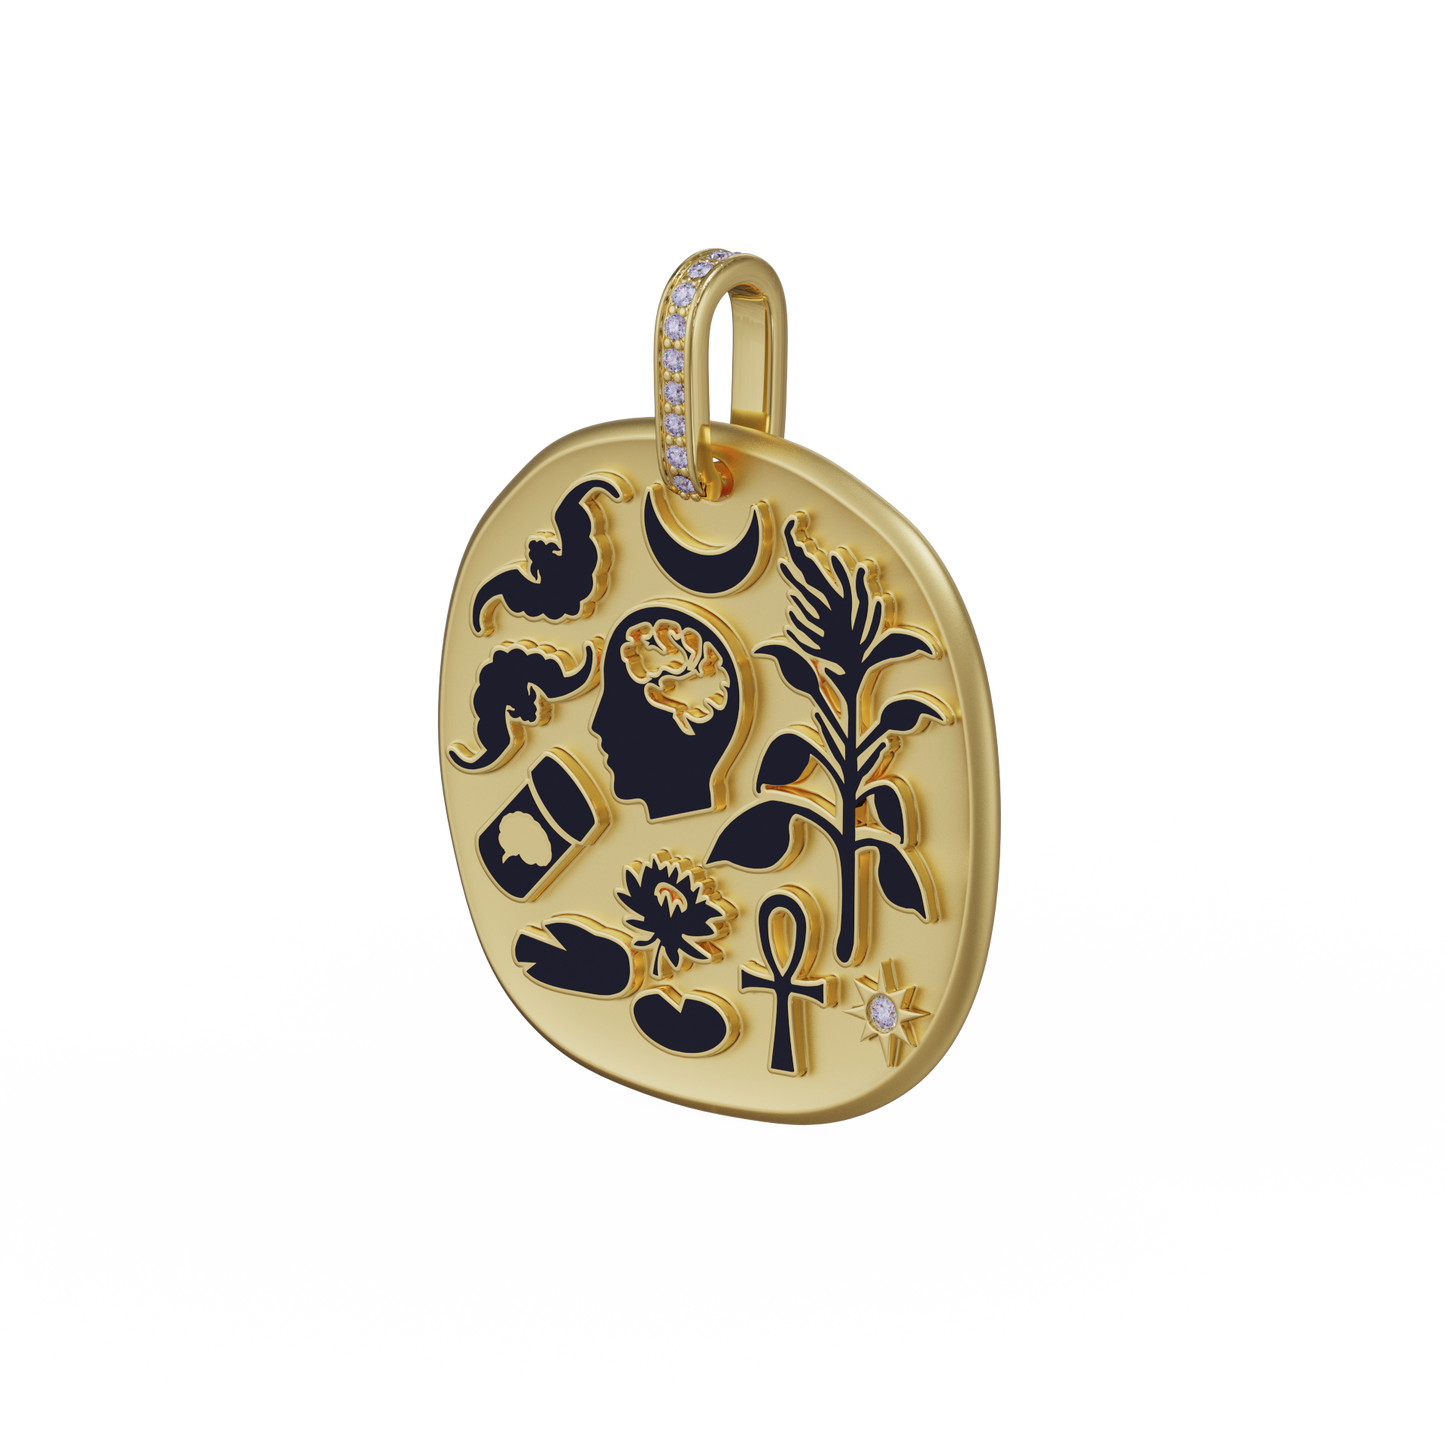 Dyne x The Seven 18K Yellow Gold Large Two-Sided Pendant with Diamonds & Black Vitreous Enamel